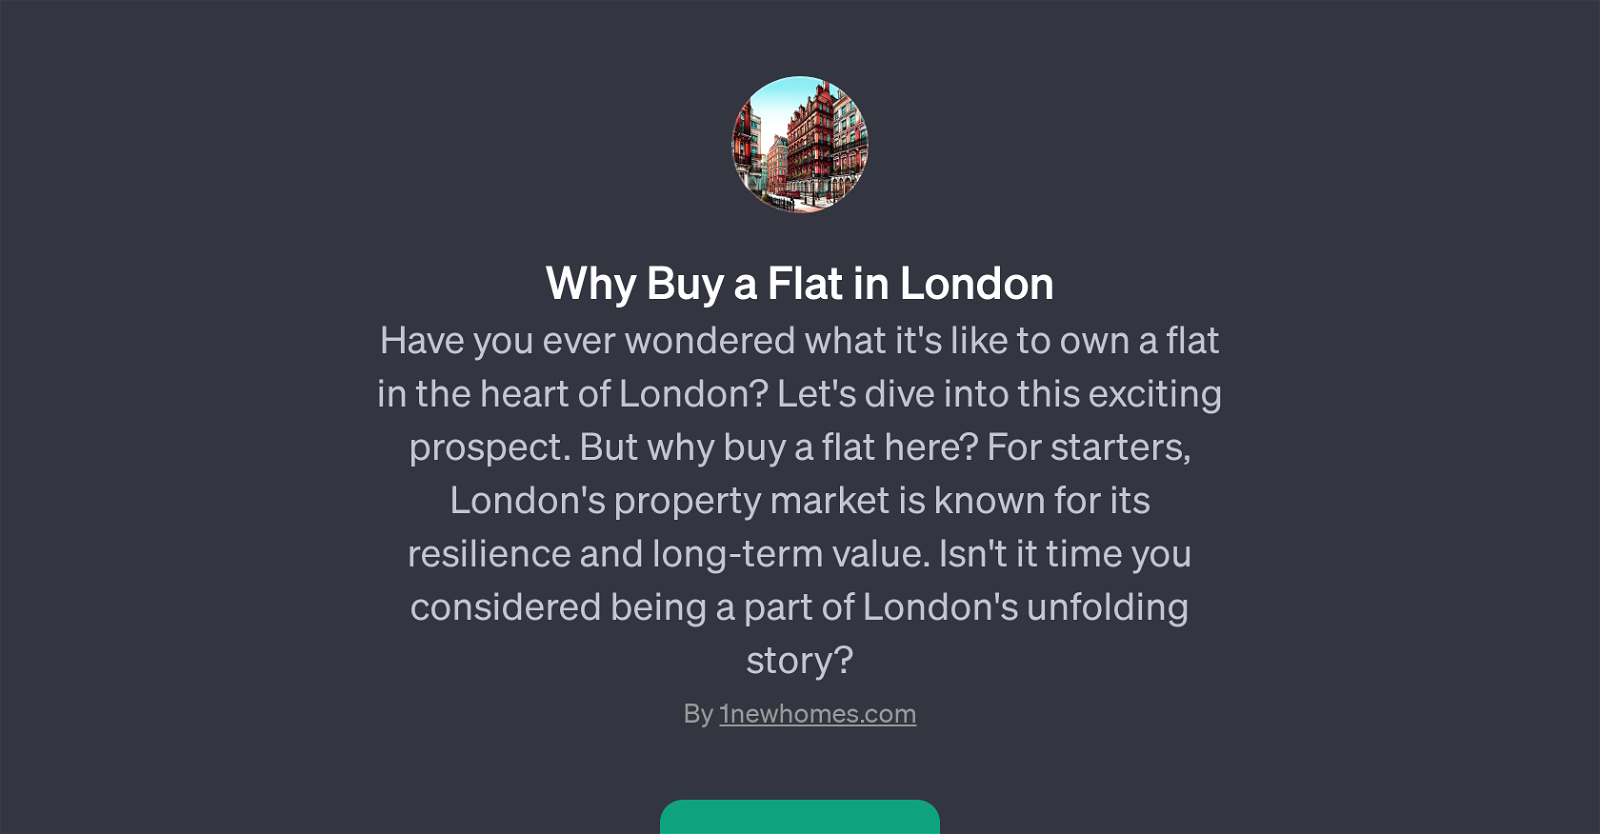 Why Buy a Flat in London website